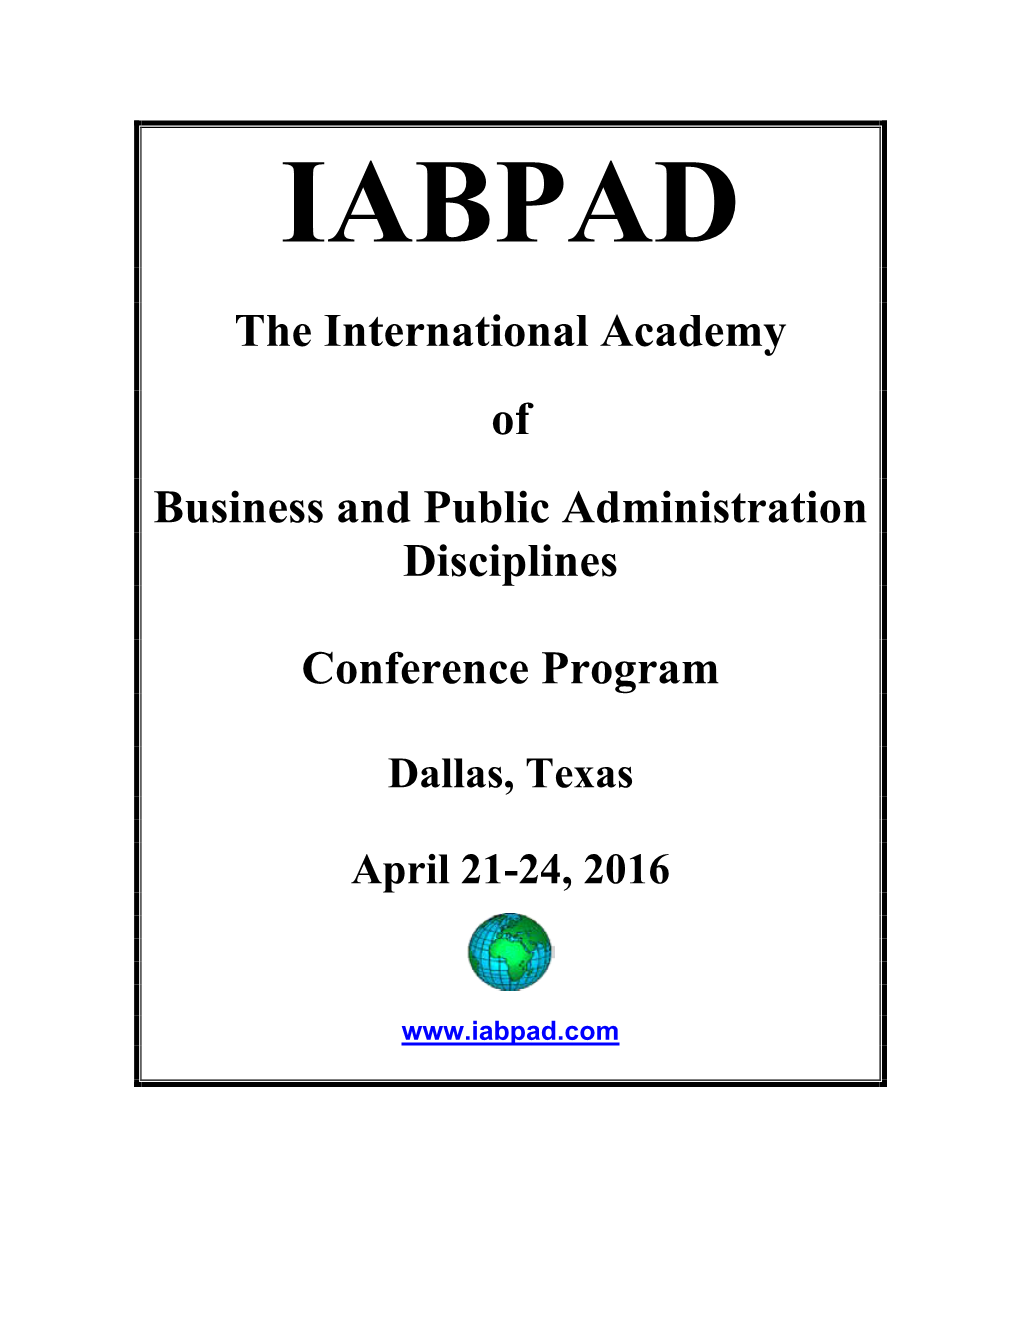 The International Academy of Business and Public Administration Disciplines